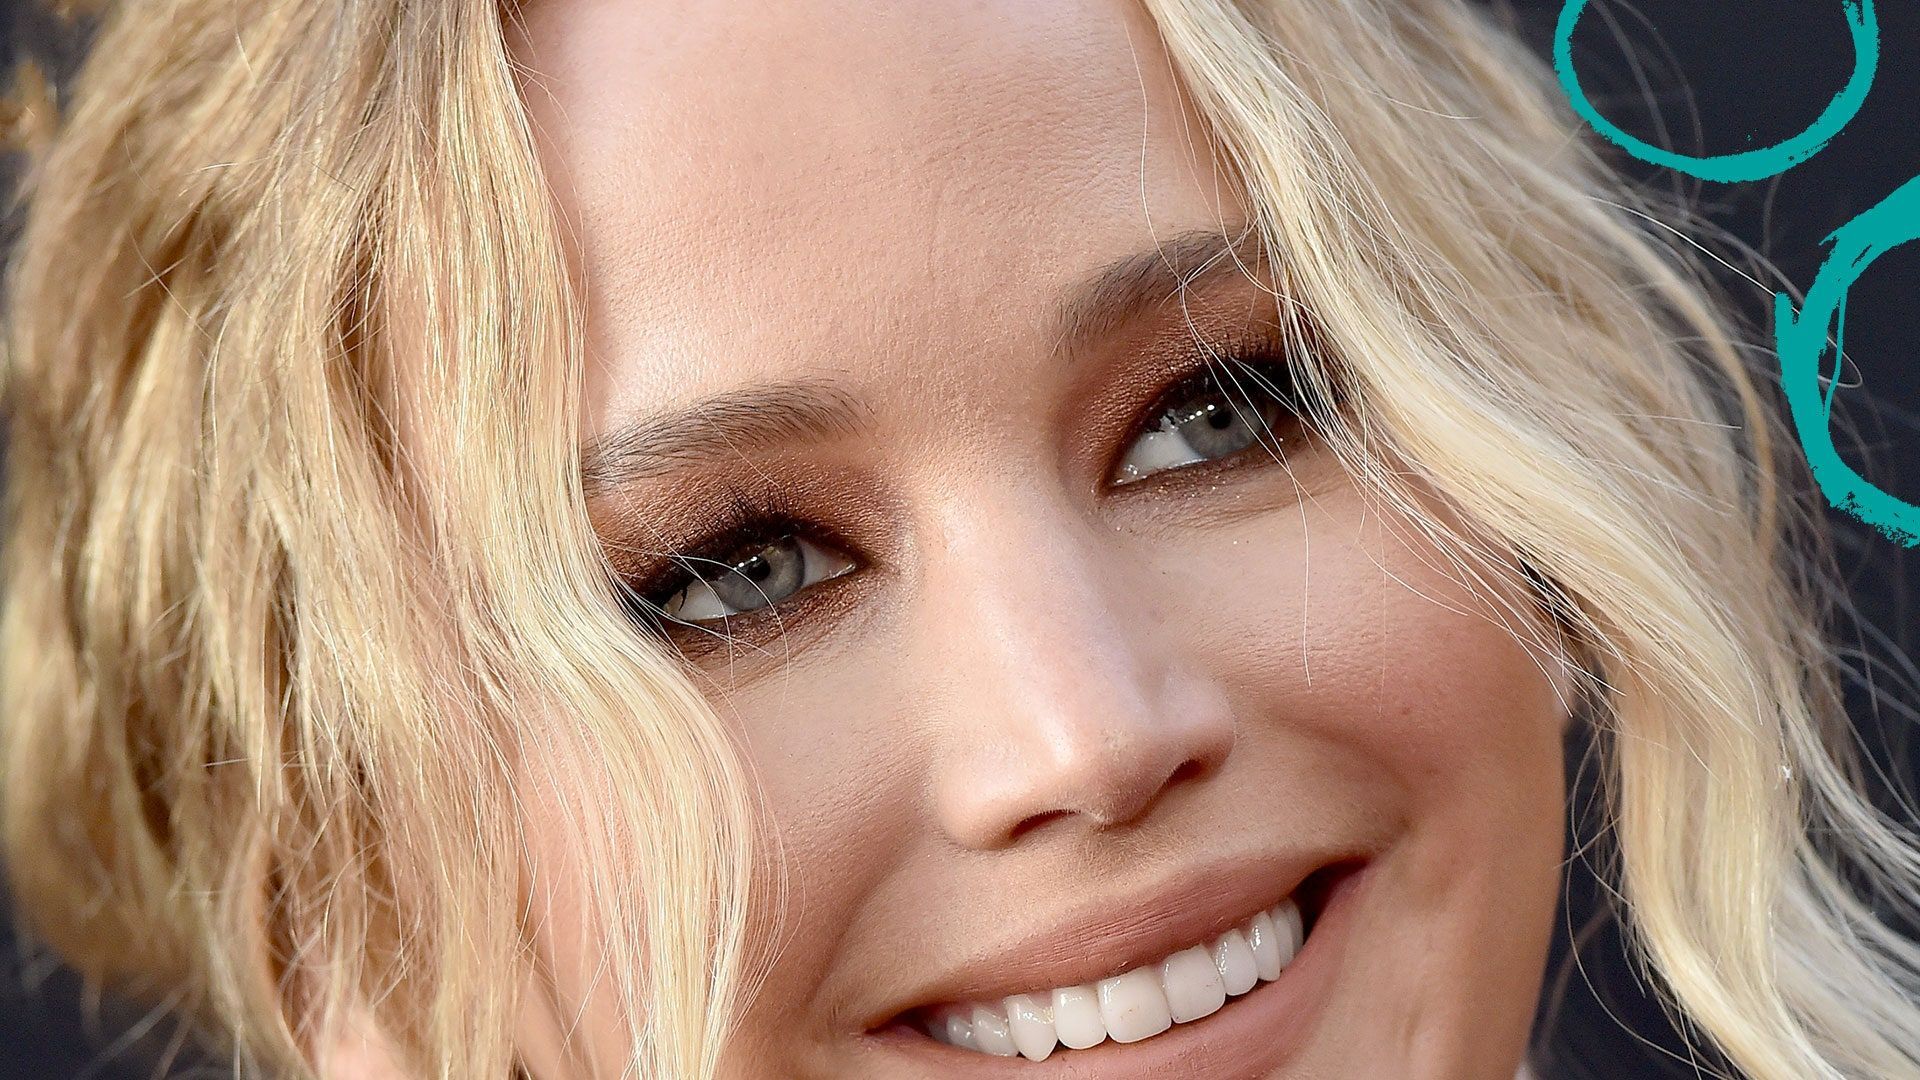 Closeup of a blonde woman with smoky eyes smiling at the camera - Jennifer Lawrence